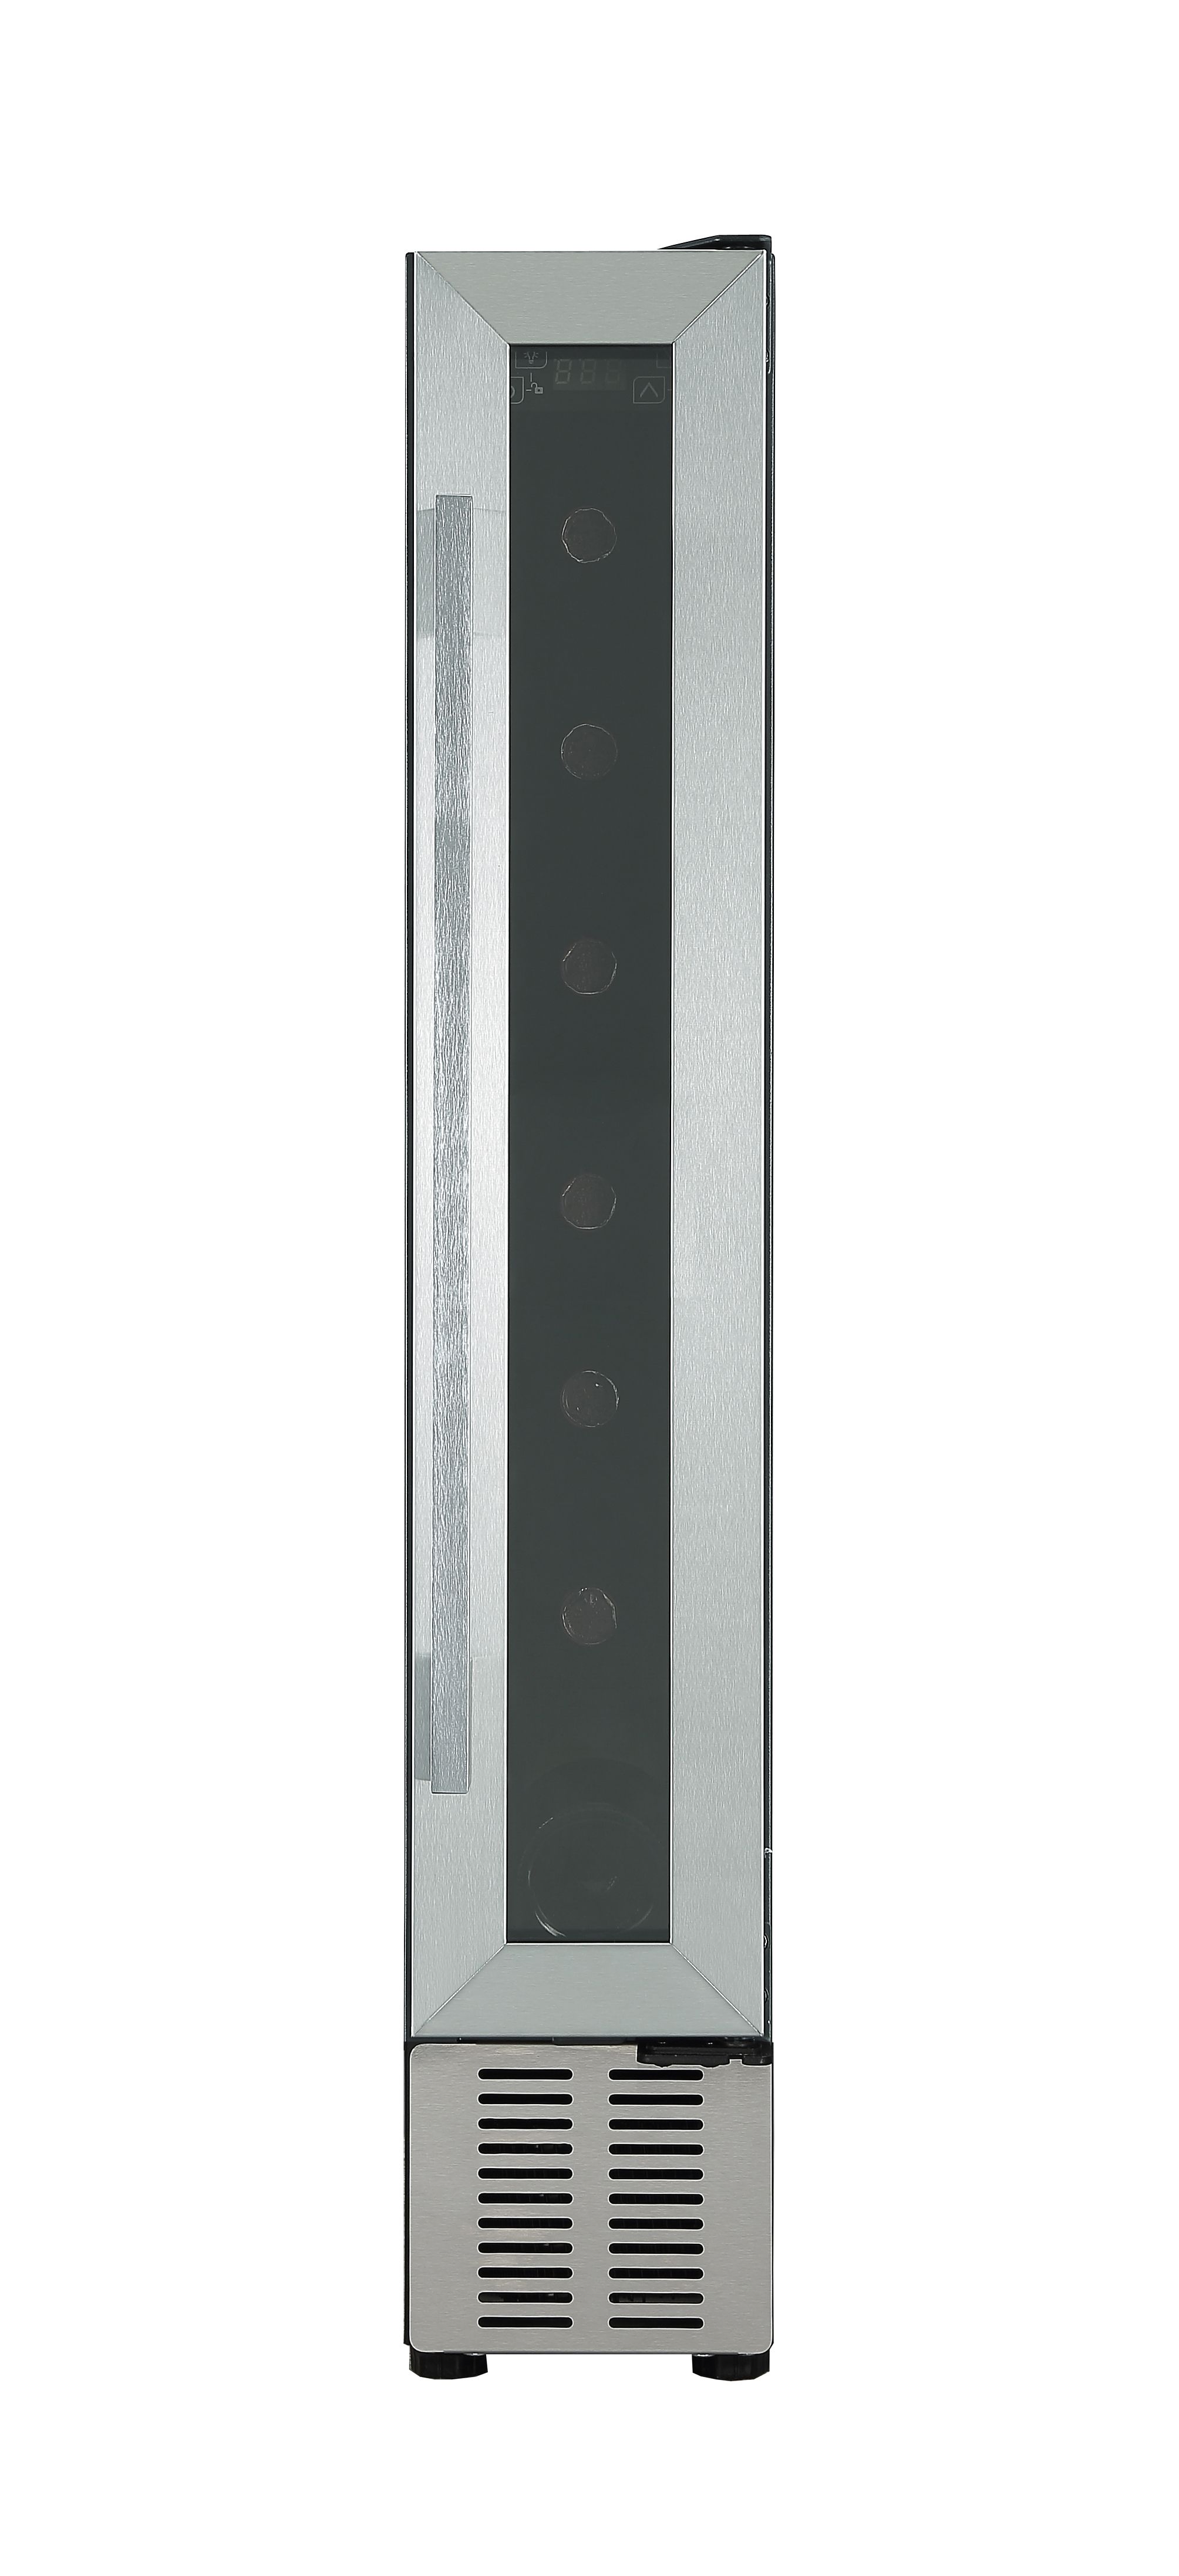 GoodHome BIWCS15UK Built-in & freestanding Wine cooler - Stainless steel effect